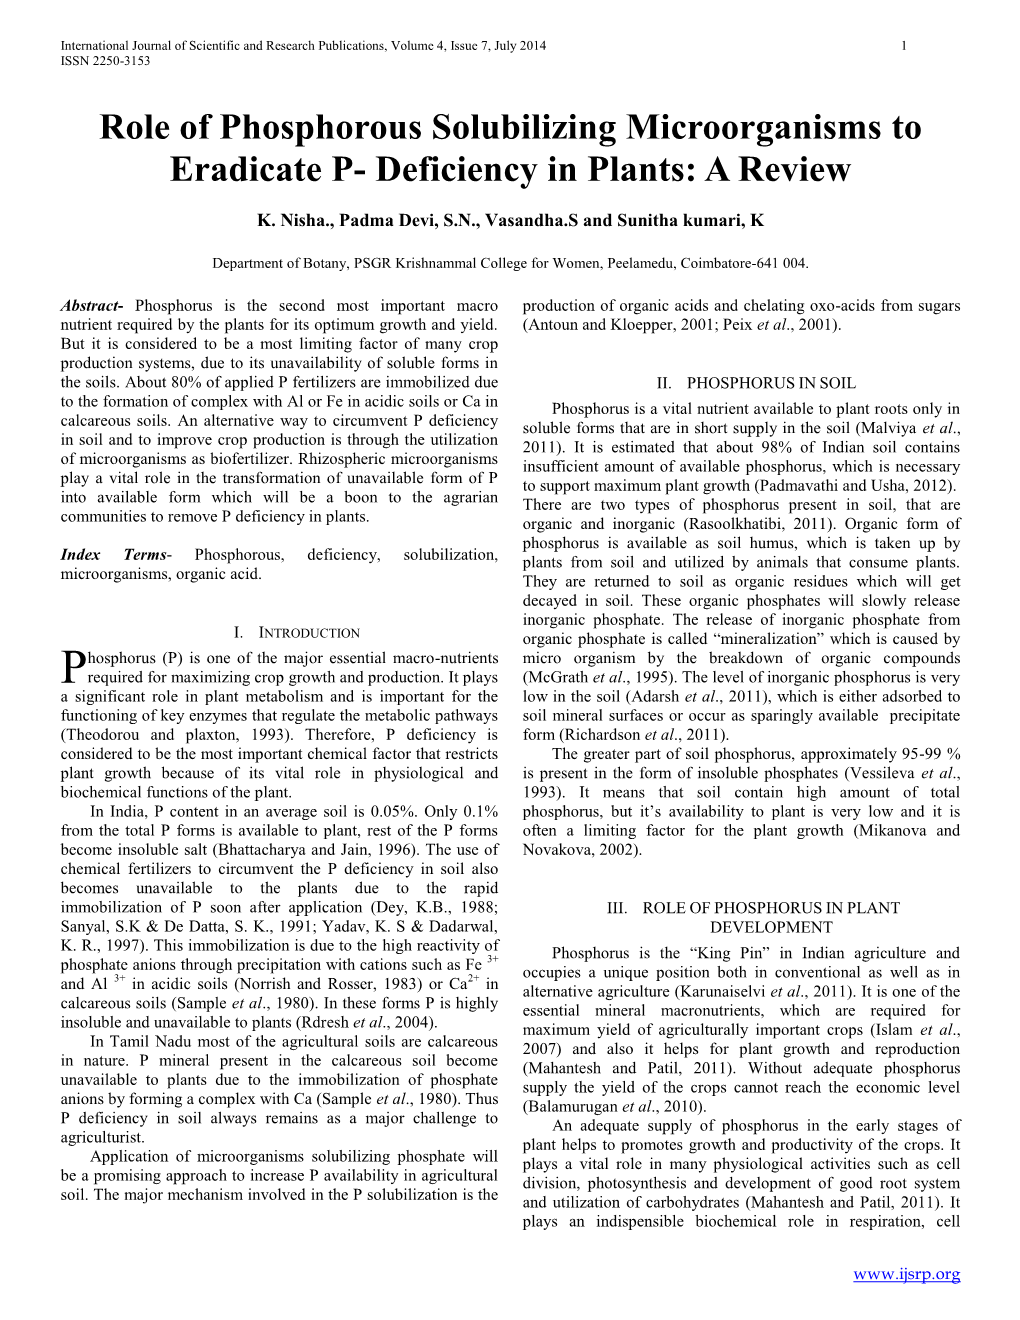 Role of Phosphorous Solubilizing Microorganisms to Eradicate P- Deficiency in Plants: a Review